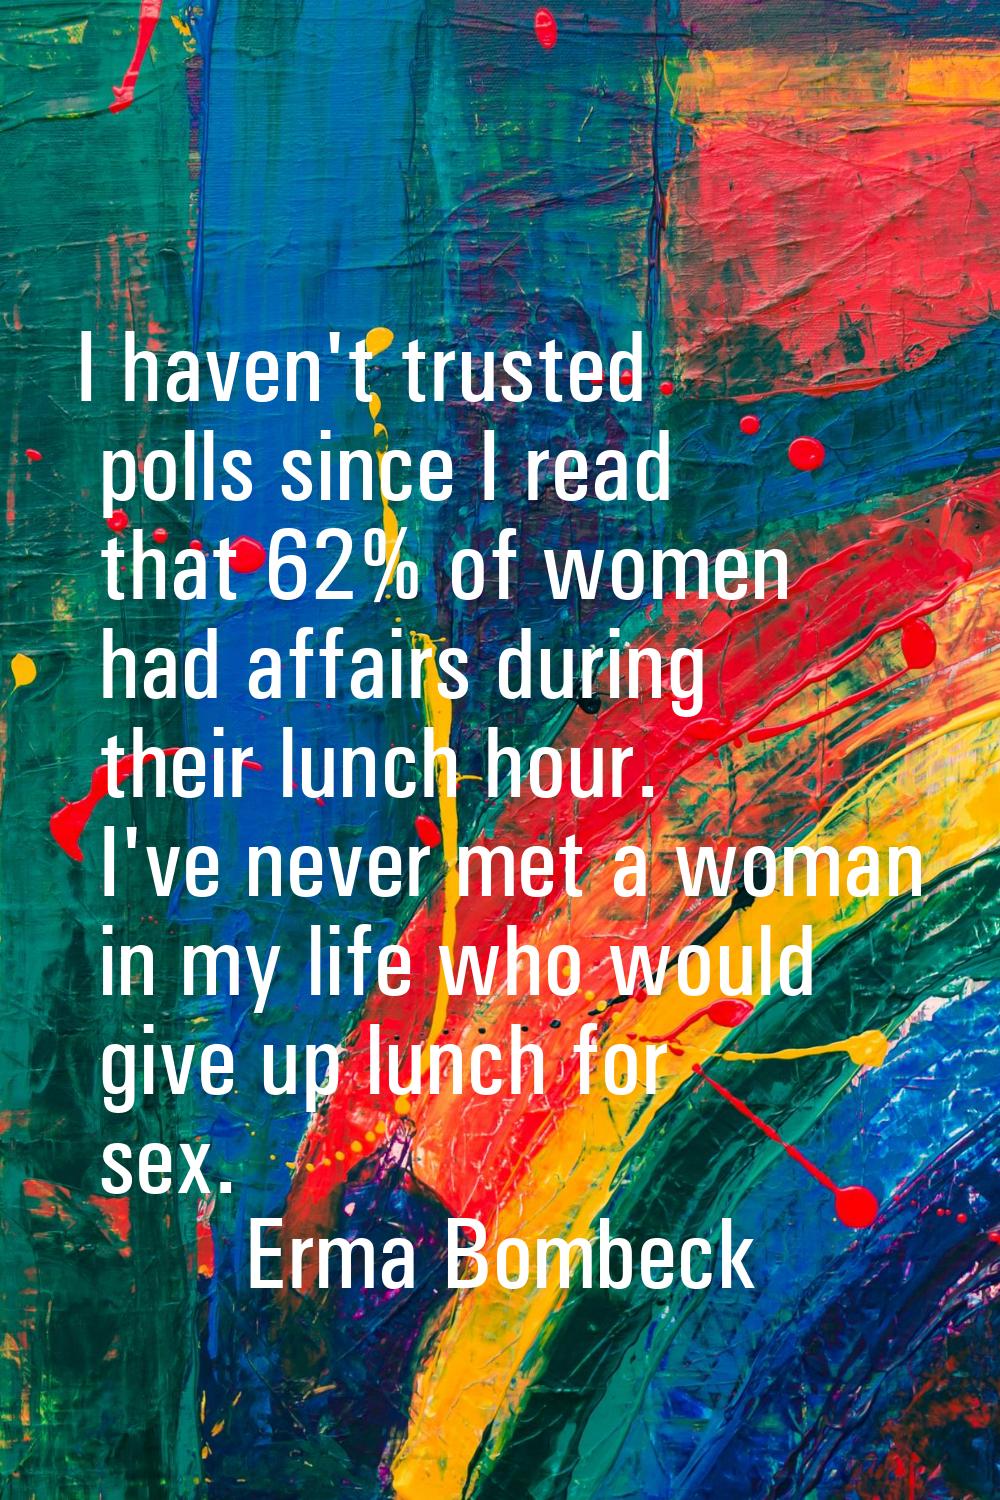 I haven't trusted polls since I read that 62% of women had affairs during their lunch hour. I've ne